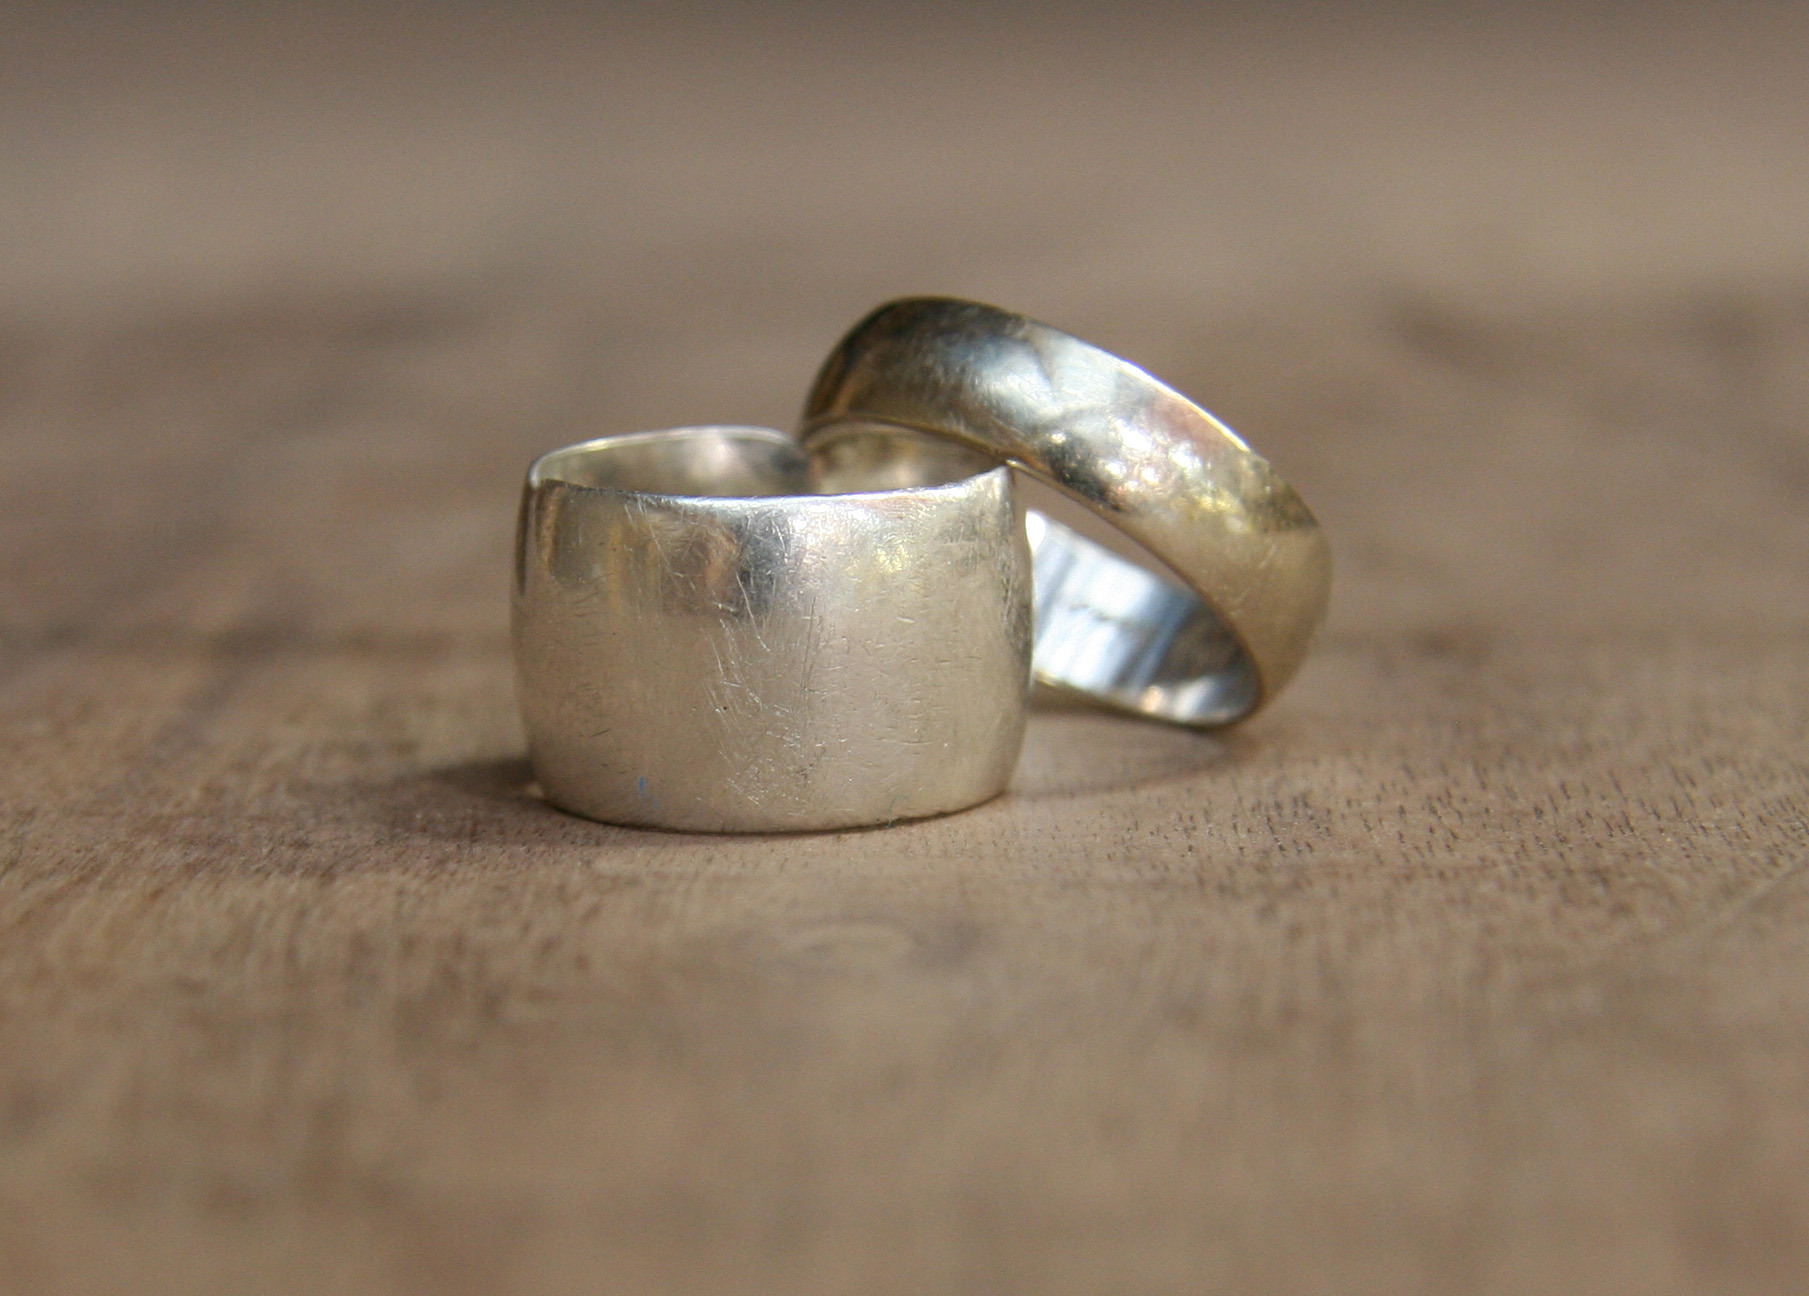 Two silver rings